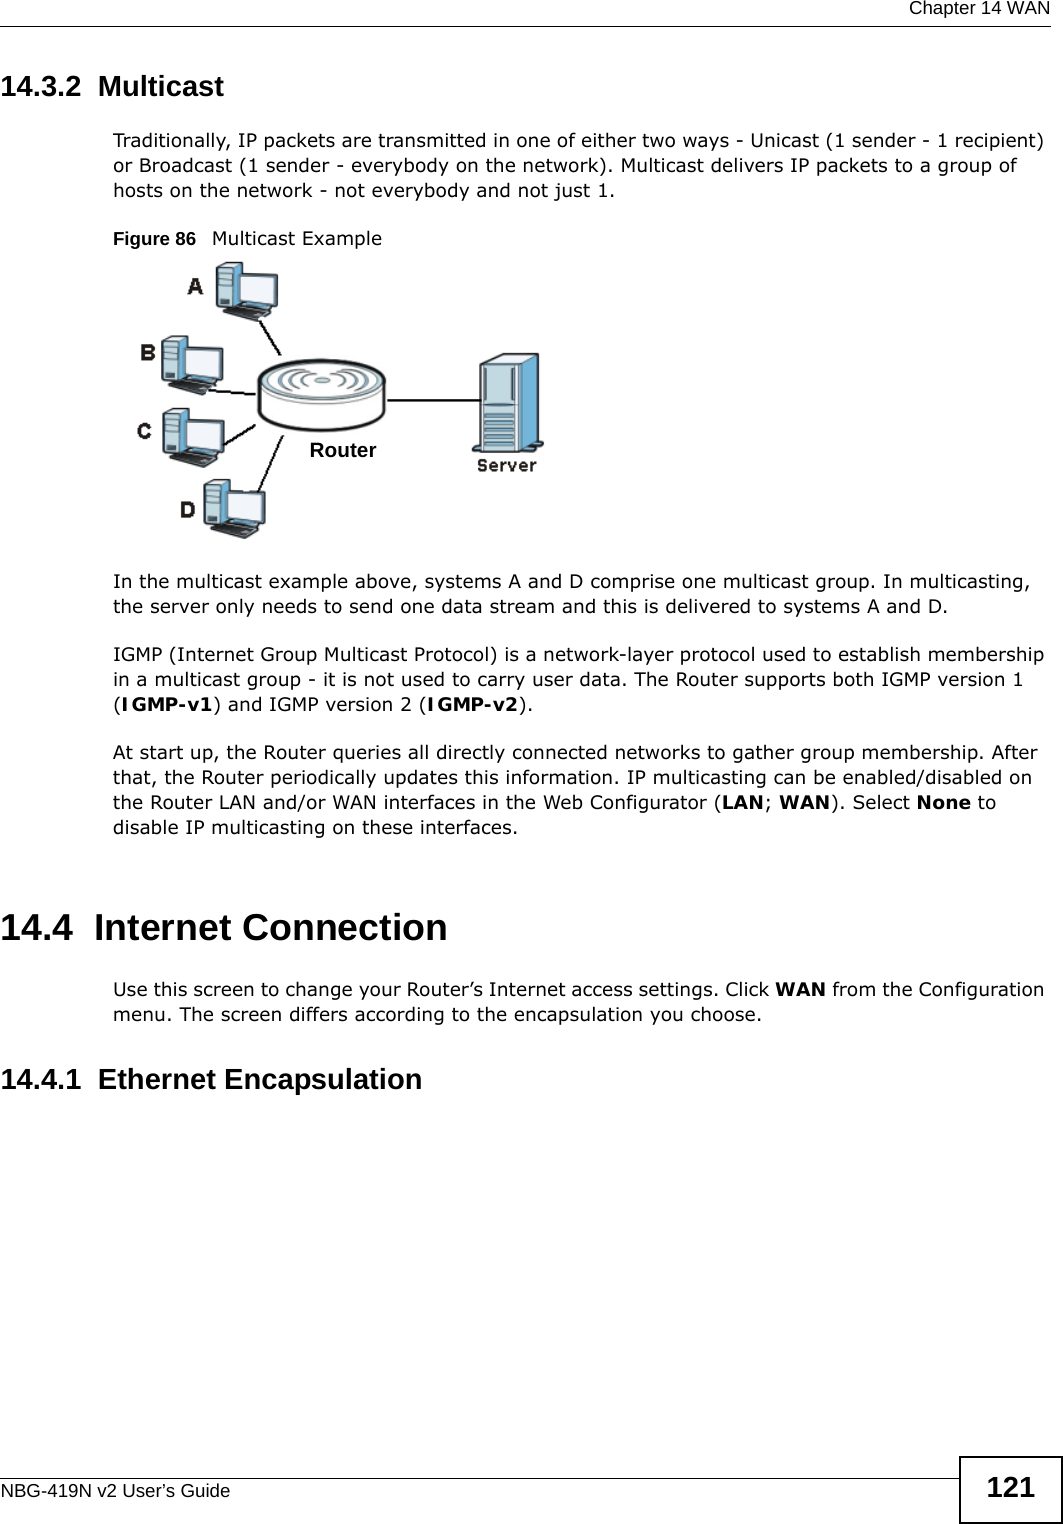  Chapter 14 WANNBG-419N v2 User’s Guide 12114.3.2  MulticastTraditionally, IP packets are transmitted in one of either two ways - Unicast (1 sender - 1 recipient) or Broadcast (1 sender - everybody on the network). Multicast delivers IP packets to a group of hosts on the network - not everybody and not just 1. Figure 86   Multicast ExampleIn the multicast example above, systems A and D comprise one multicast group. In multicasting, the server only needs to send one data stream and this is delivered to systems A and D. IGMP (Internet Group Multicast Protocol) is a network-layer protocol used to establish membership in a multicast group - it is not used to carry user data. The Router supports both IGMP version 1 (IGMP-v1) and IGMP version 2 (IGMP-v2). At start up, the Router queries all directly connected networks to gather group membership. After that, the Router periodically updates this information. IP multicasting can be enabled/disabled on the Router LAN and/or WAN interfaces in the Web Configurator (LAN; WAN). Select None to disable IP multicasting on these interfaces.14.4  Internet ConnectionUse this screen to change your Router’s Internet access settings. Click WAN from the Configuration menu. The screen differs according to the encapsulation you choose.14.4.1  Ethernet EncapsulationRouter